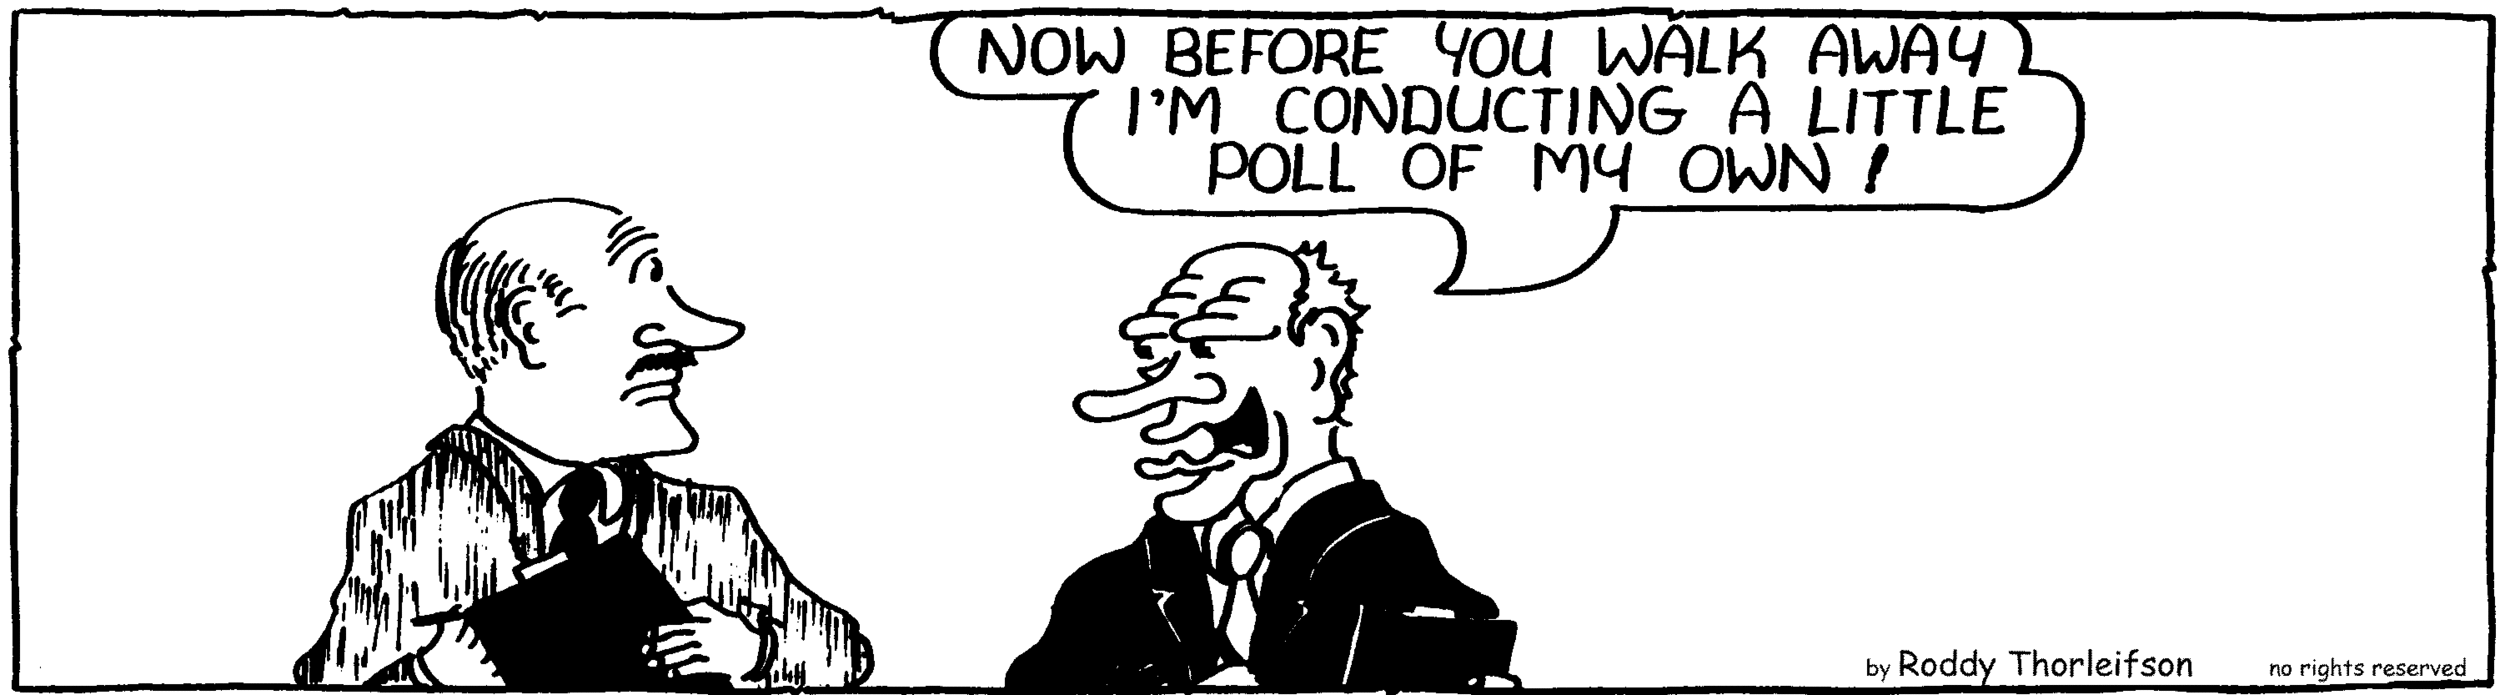 cartoon about polls and a poll of my own